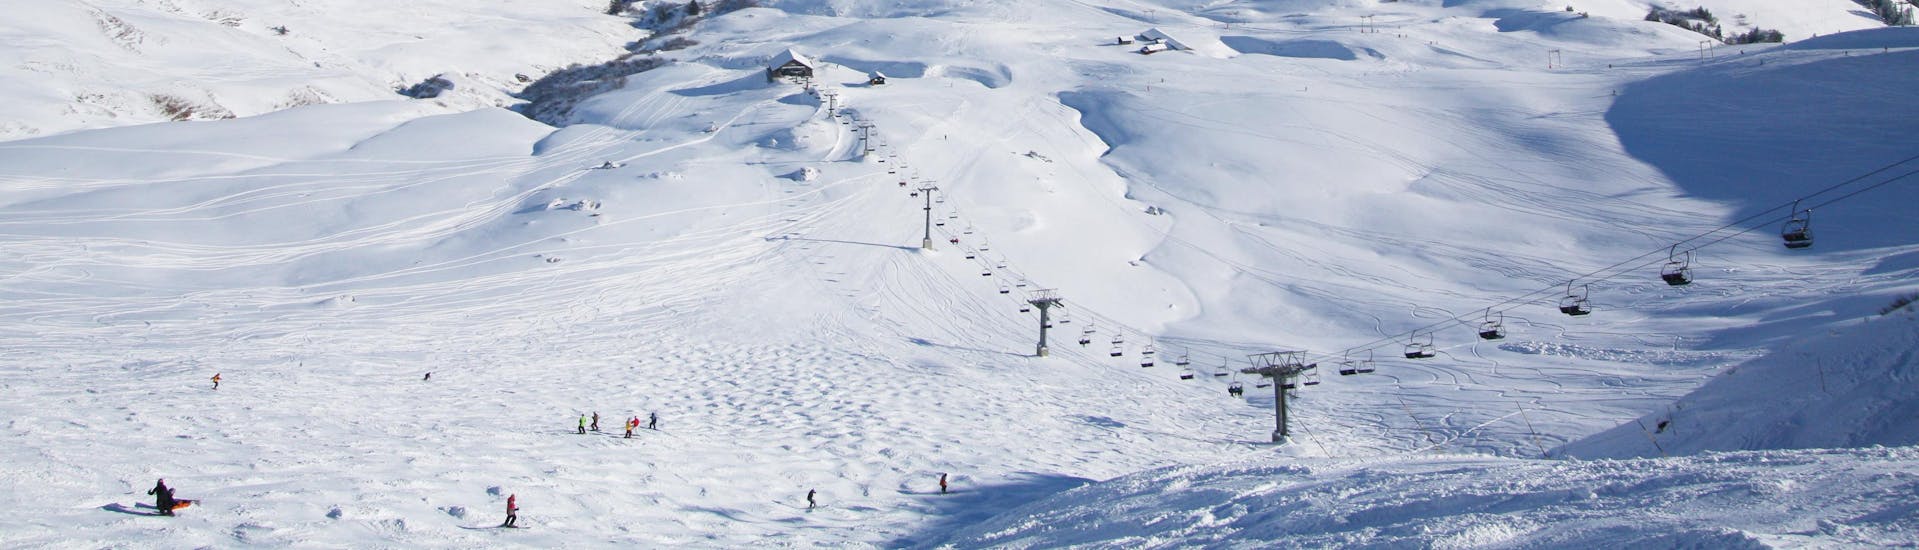 A view of the snowy slopes of the Swiss ski resort Les Crosets where local ski schools offer a wide range of ski lessons to those who want to learn to ski.